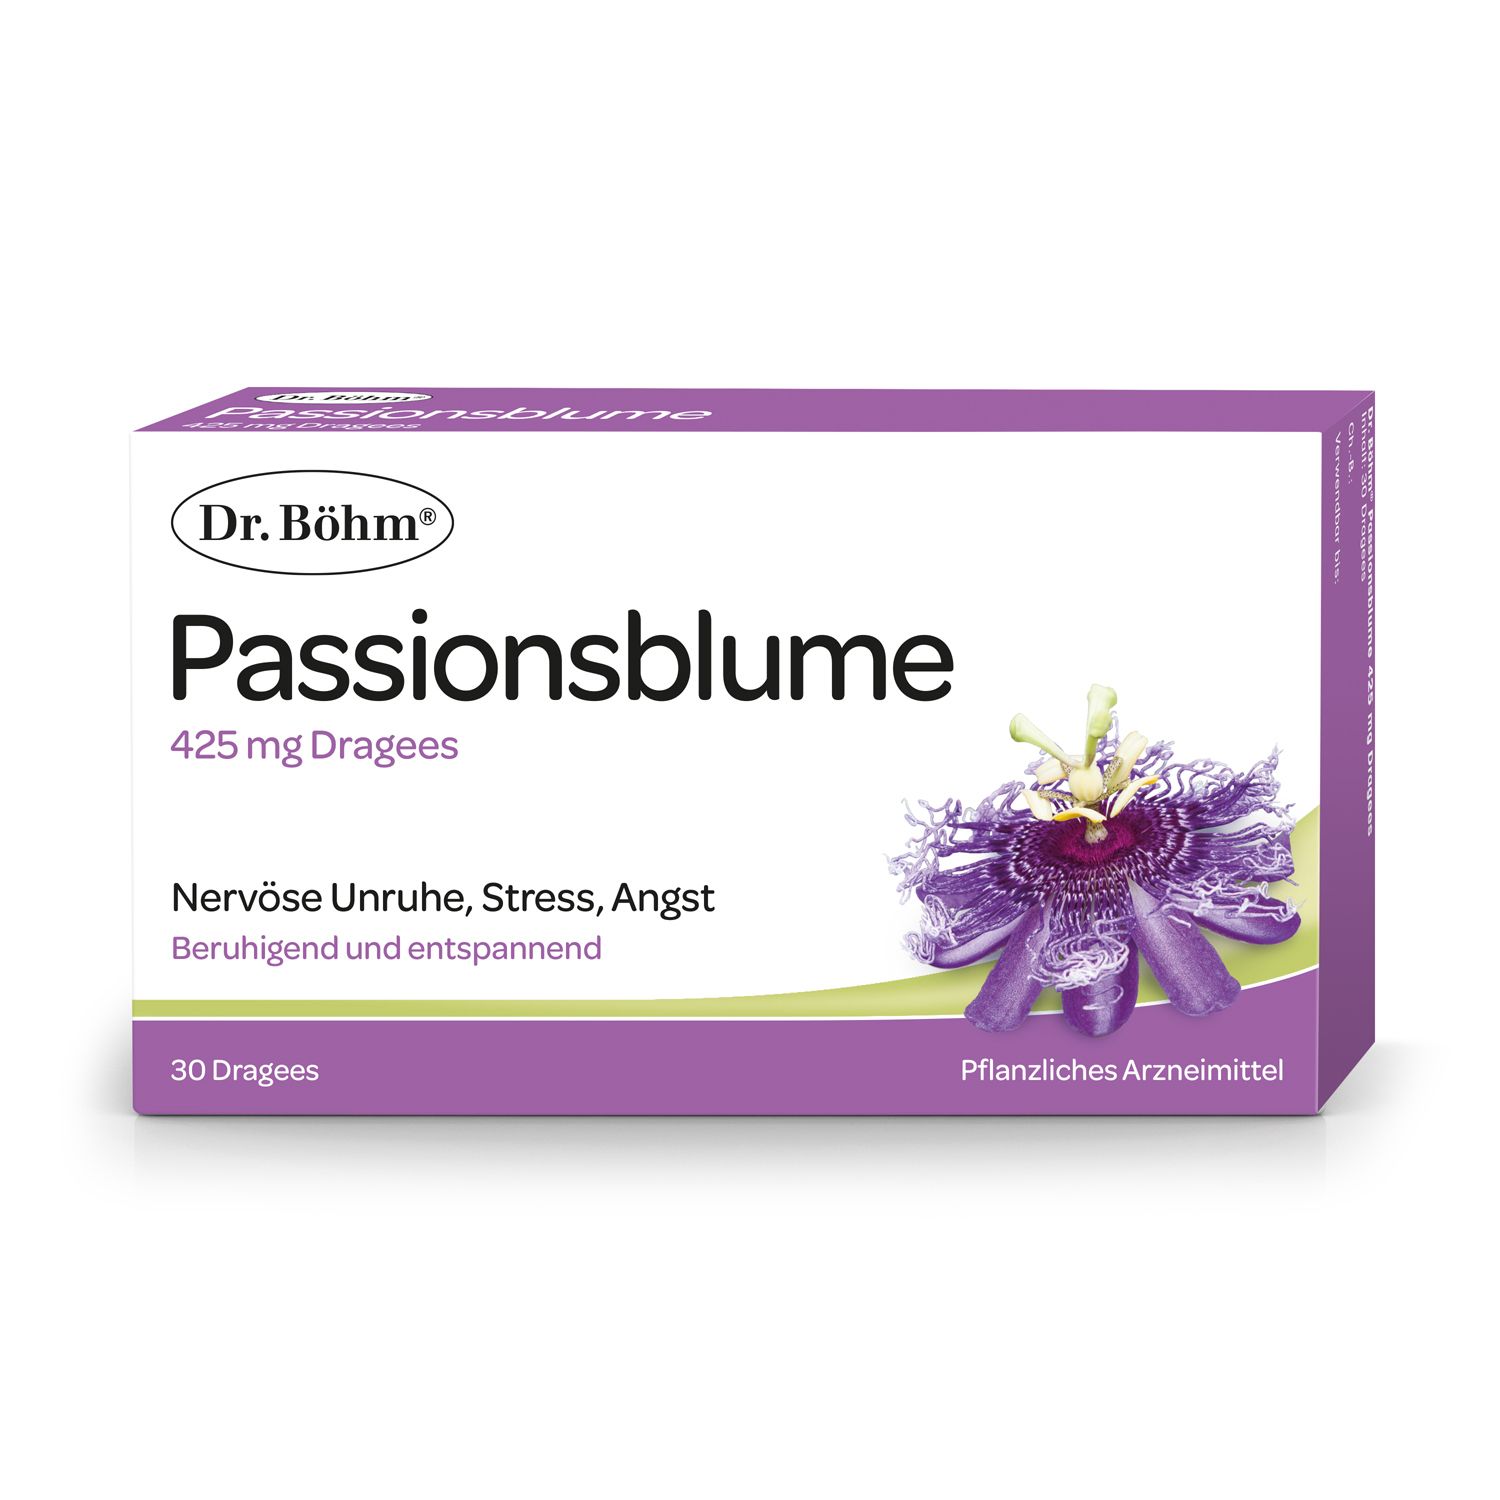 Dr. Böhm® Passionsblume 425 mg Dragees